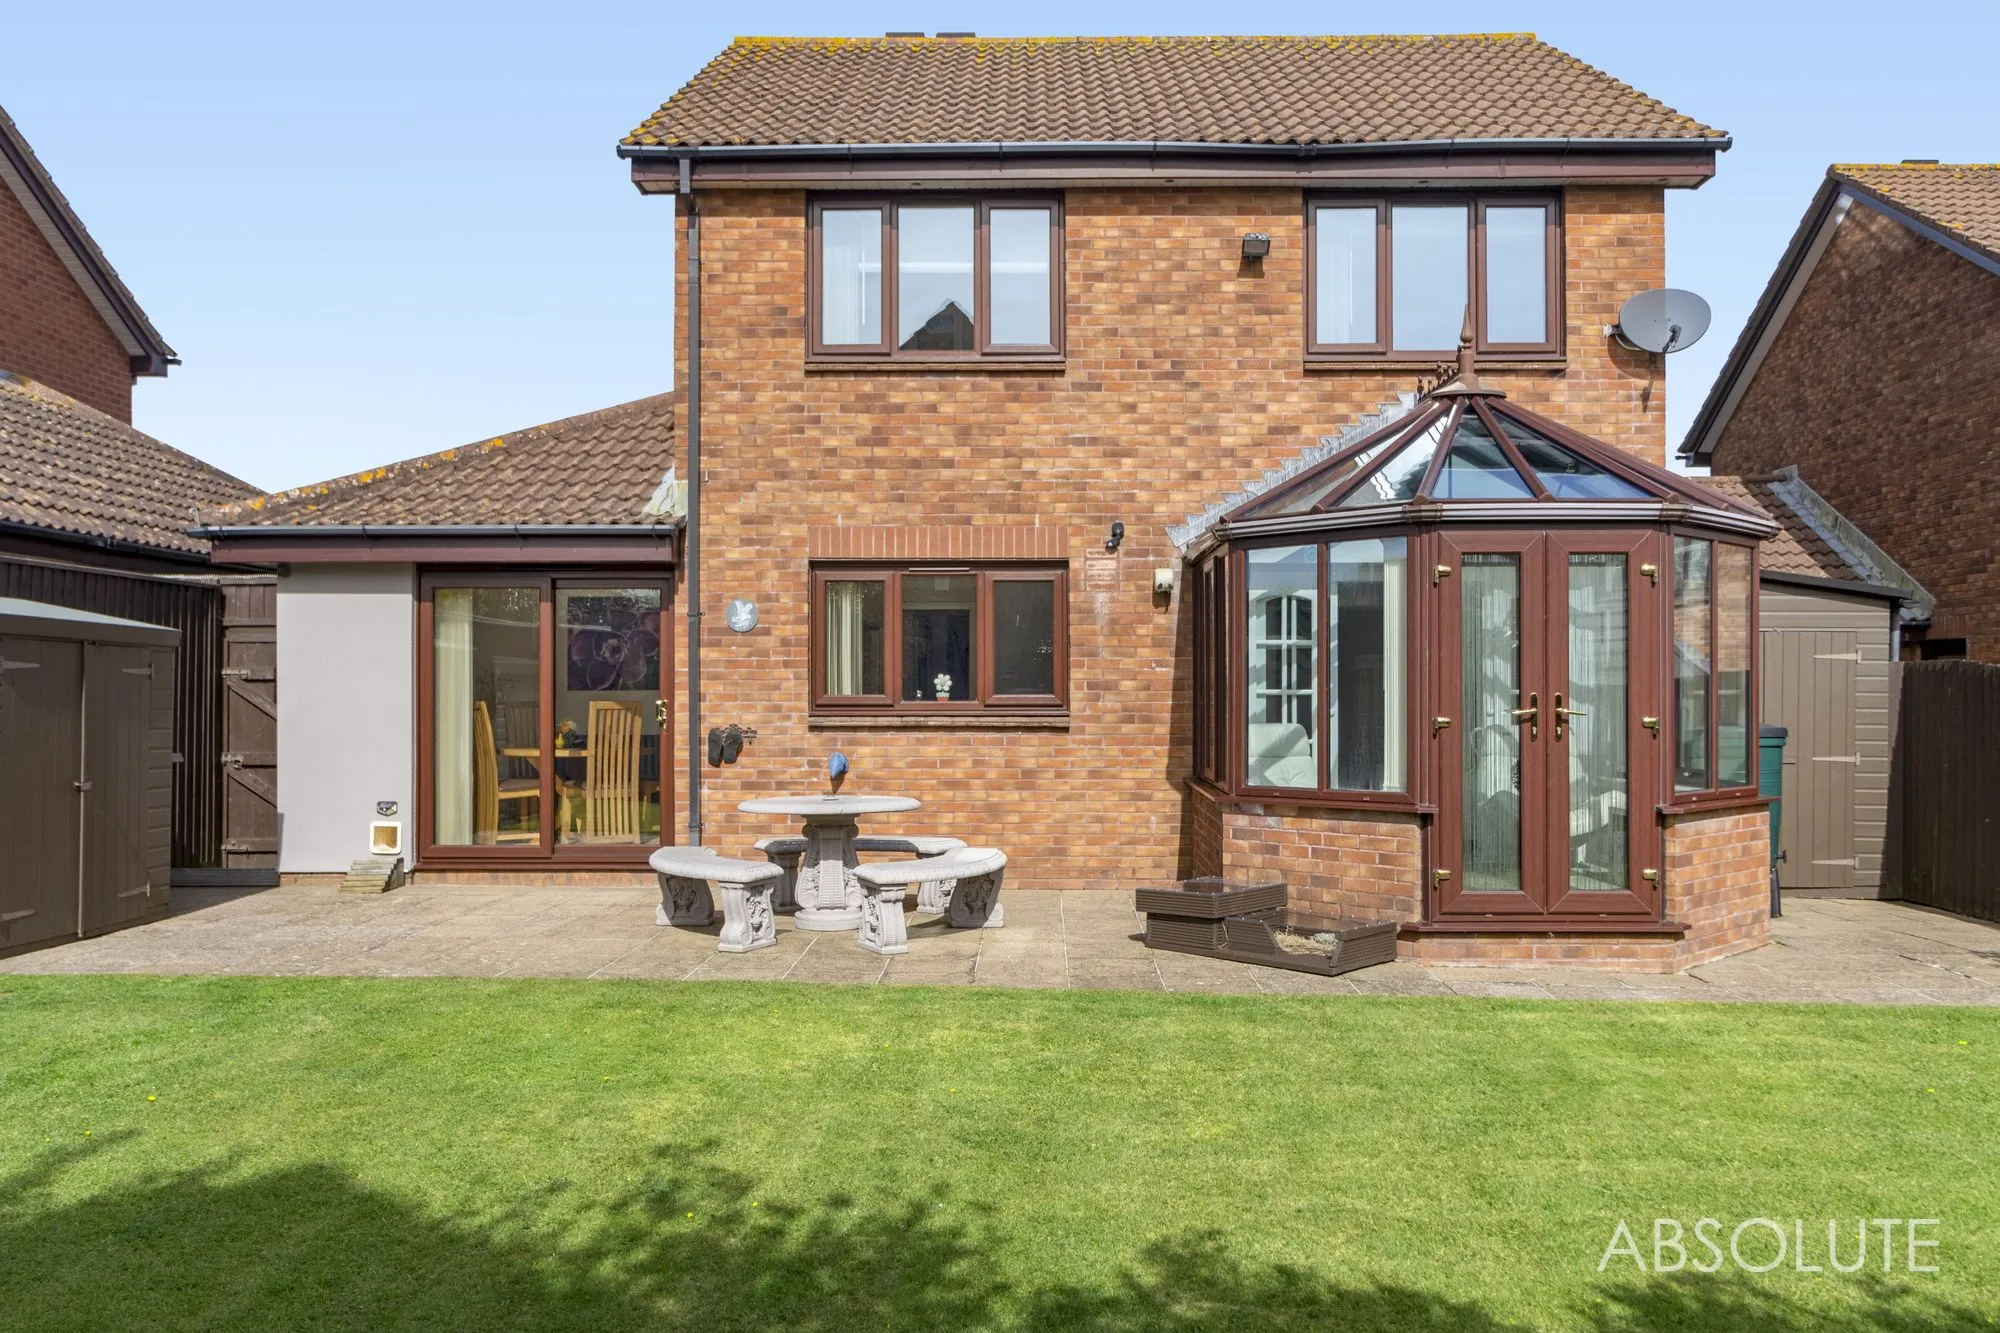 4 bed detached house for sale 26